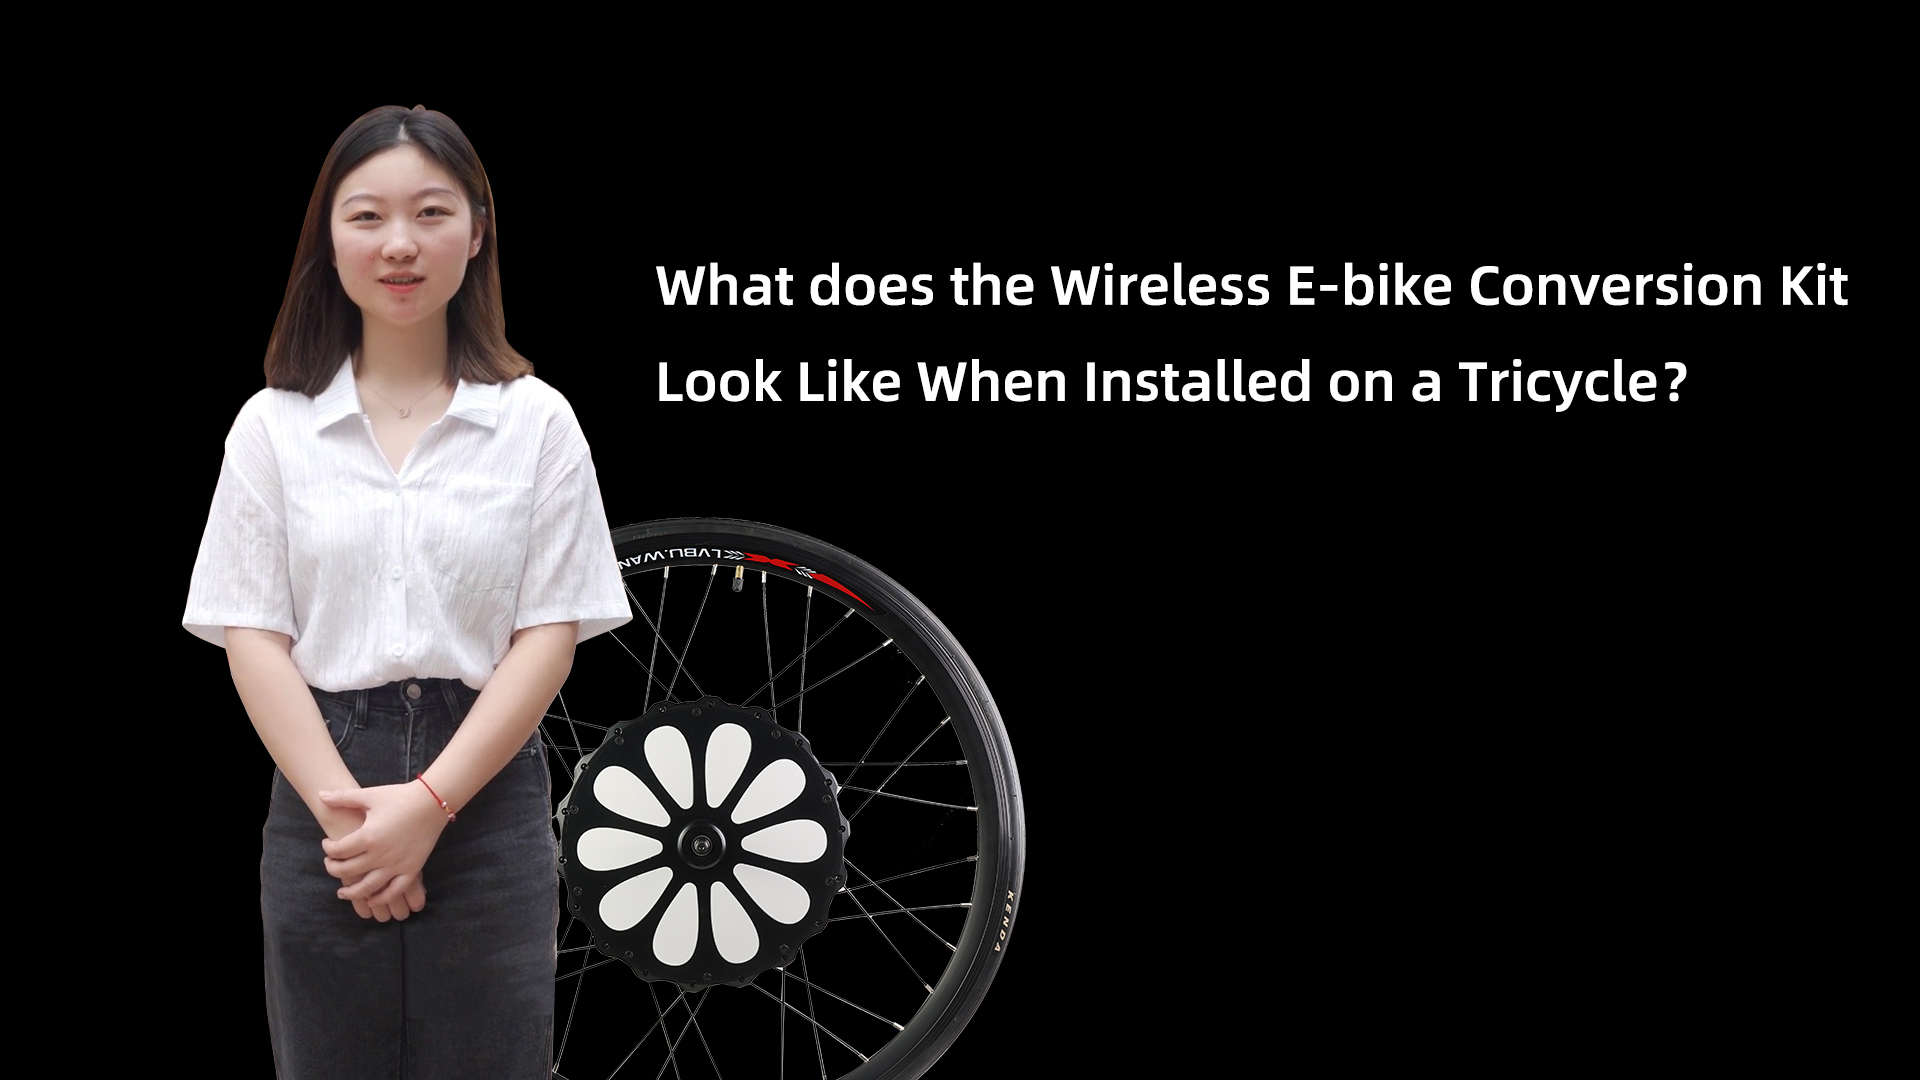 What does the Wireless E-bike Conversion Kit Look Like When Installed on a Tricycle？ Brushless Hub Motor/Lithium ion battery/All in one hub/front wheel/IP65 waterproof petal surface design/hidden power